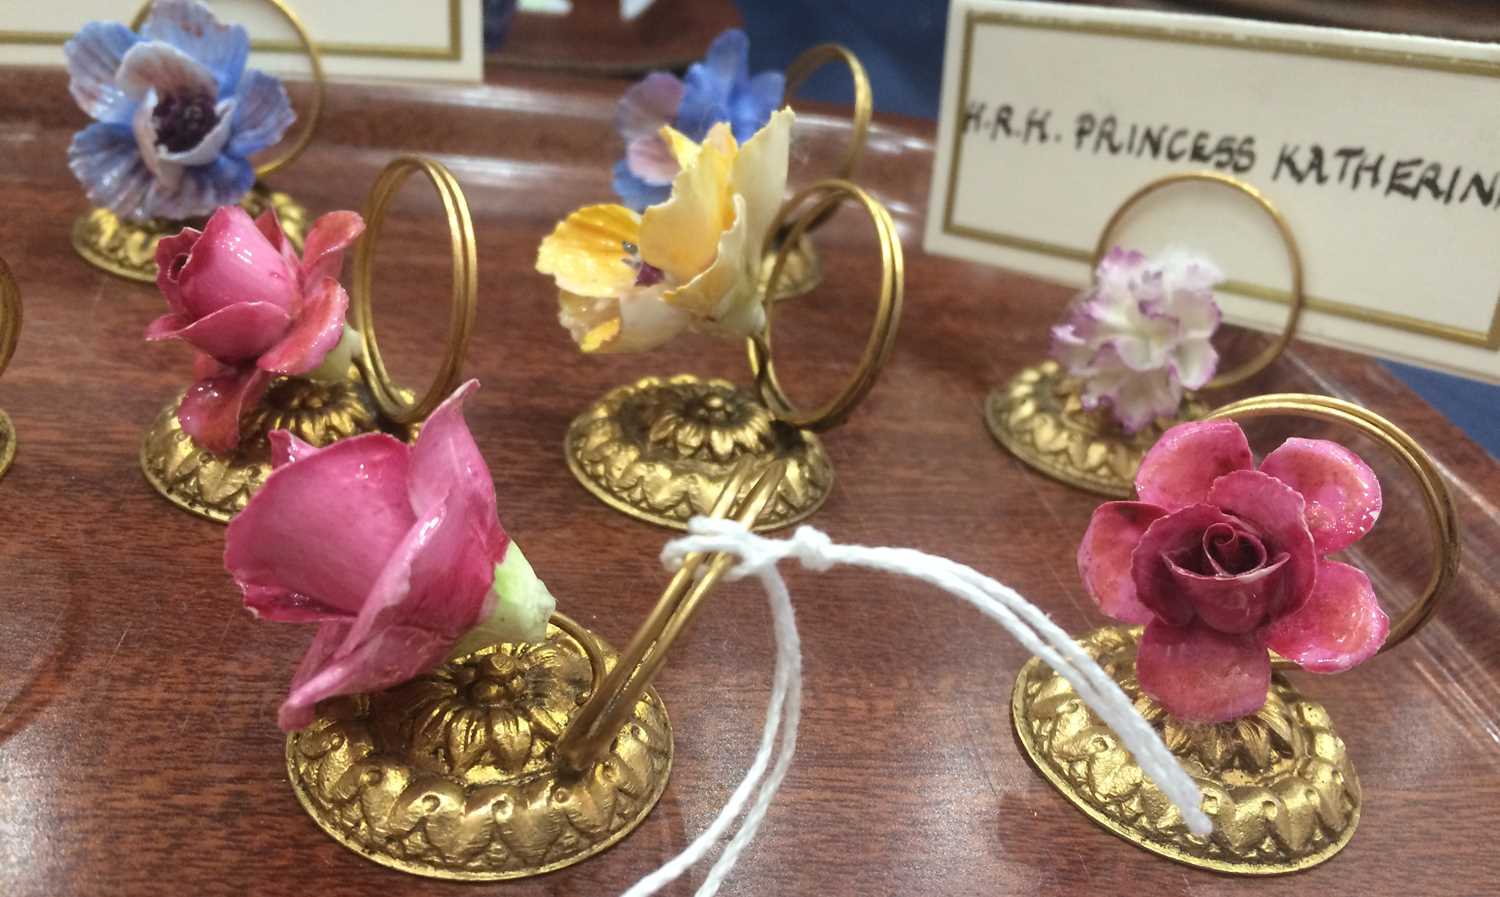 A Set of Fourteen Porcelain-Mounted Gilt Metal Place Card Holders, early 20th century, each with a - Image 2 of 5